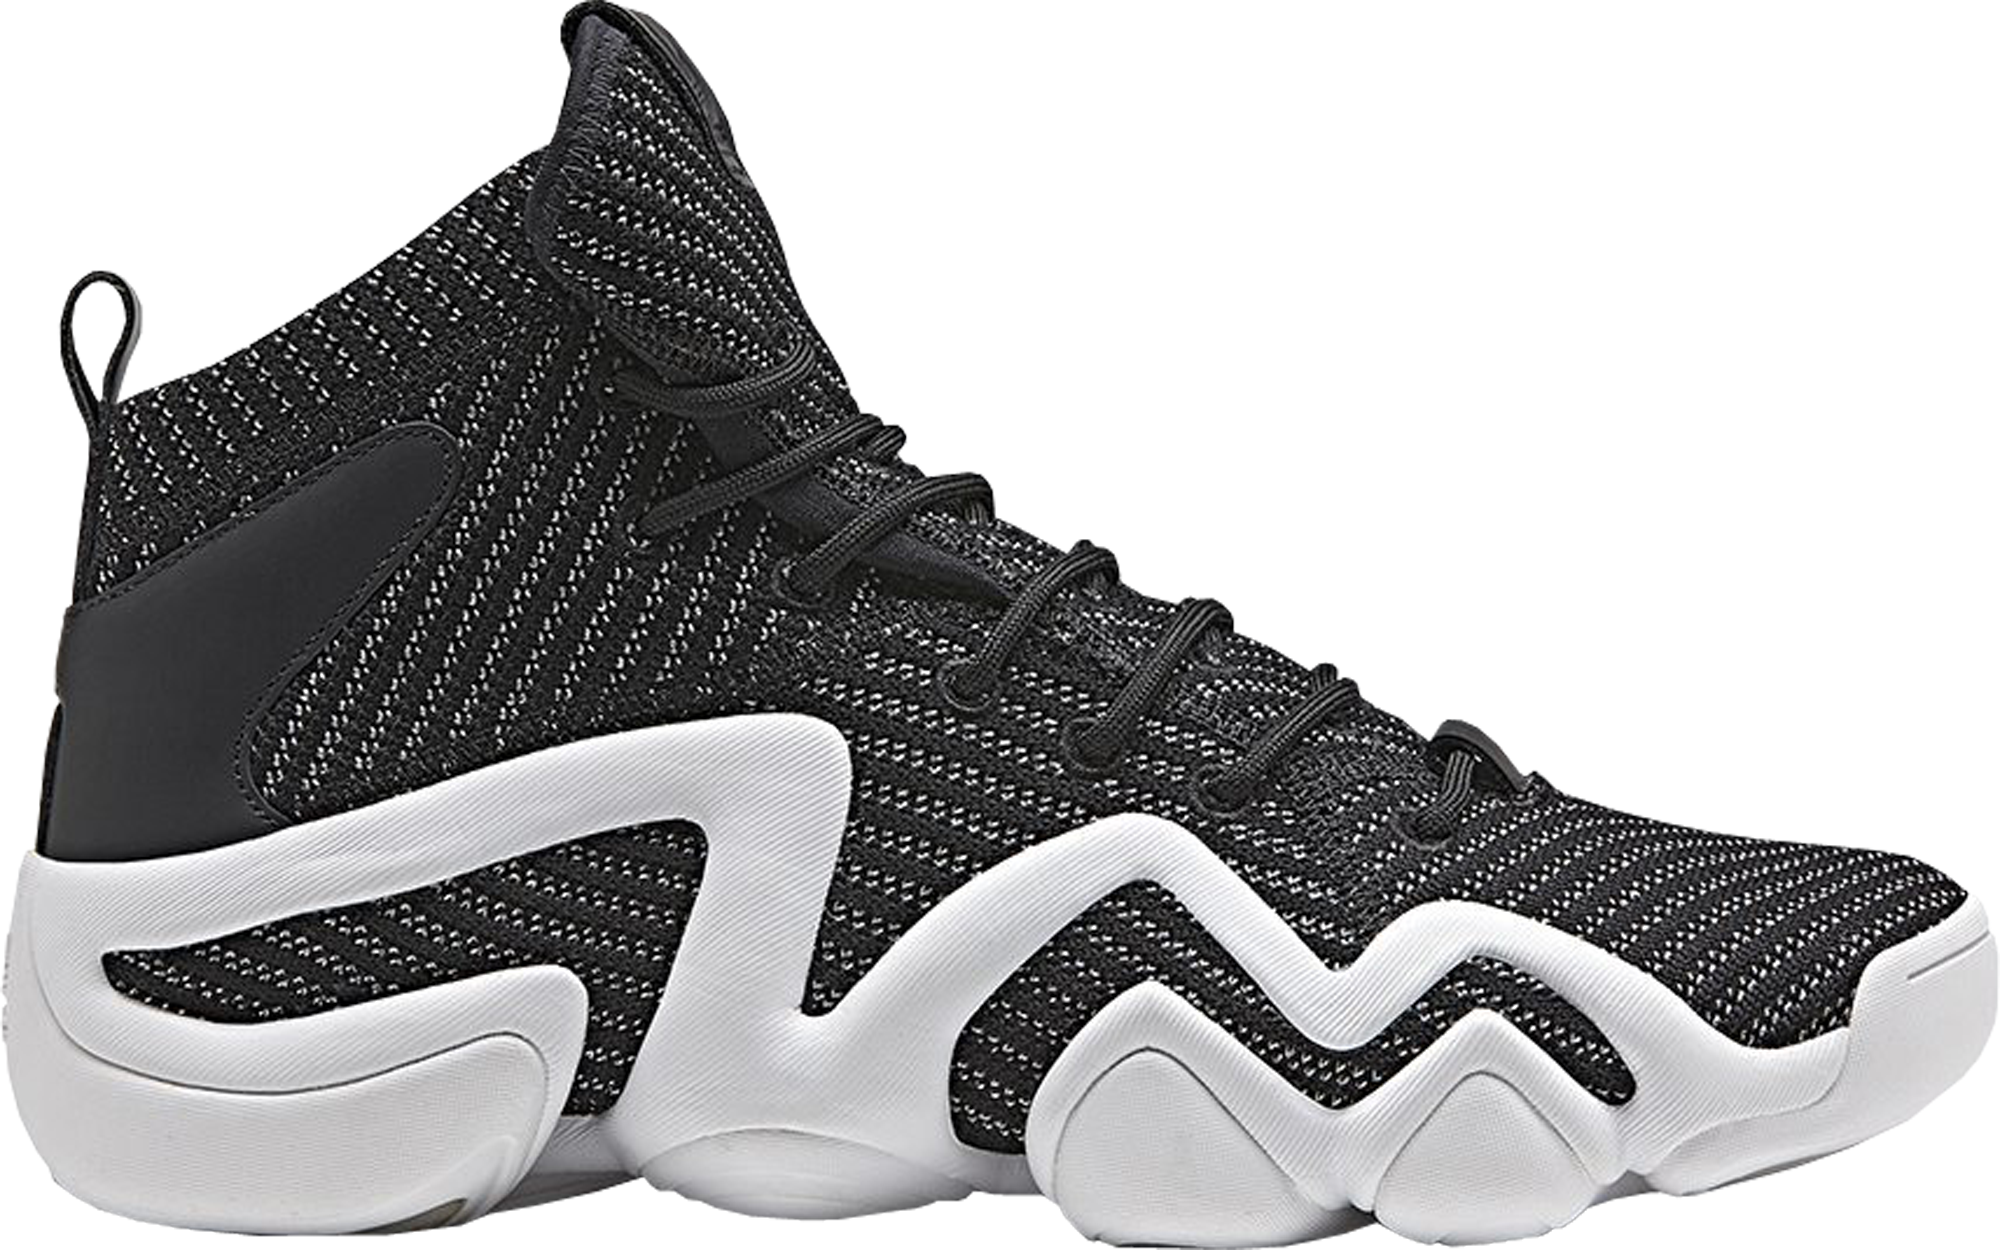 adidas Crazy 8 Adv Lusso - BY4423